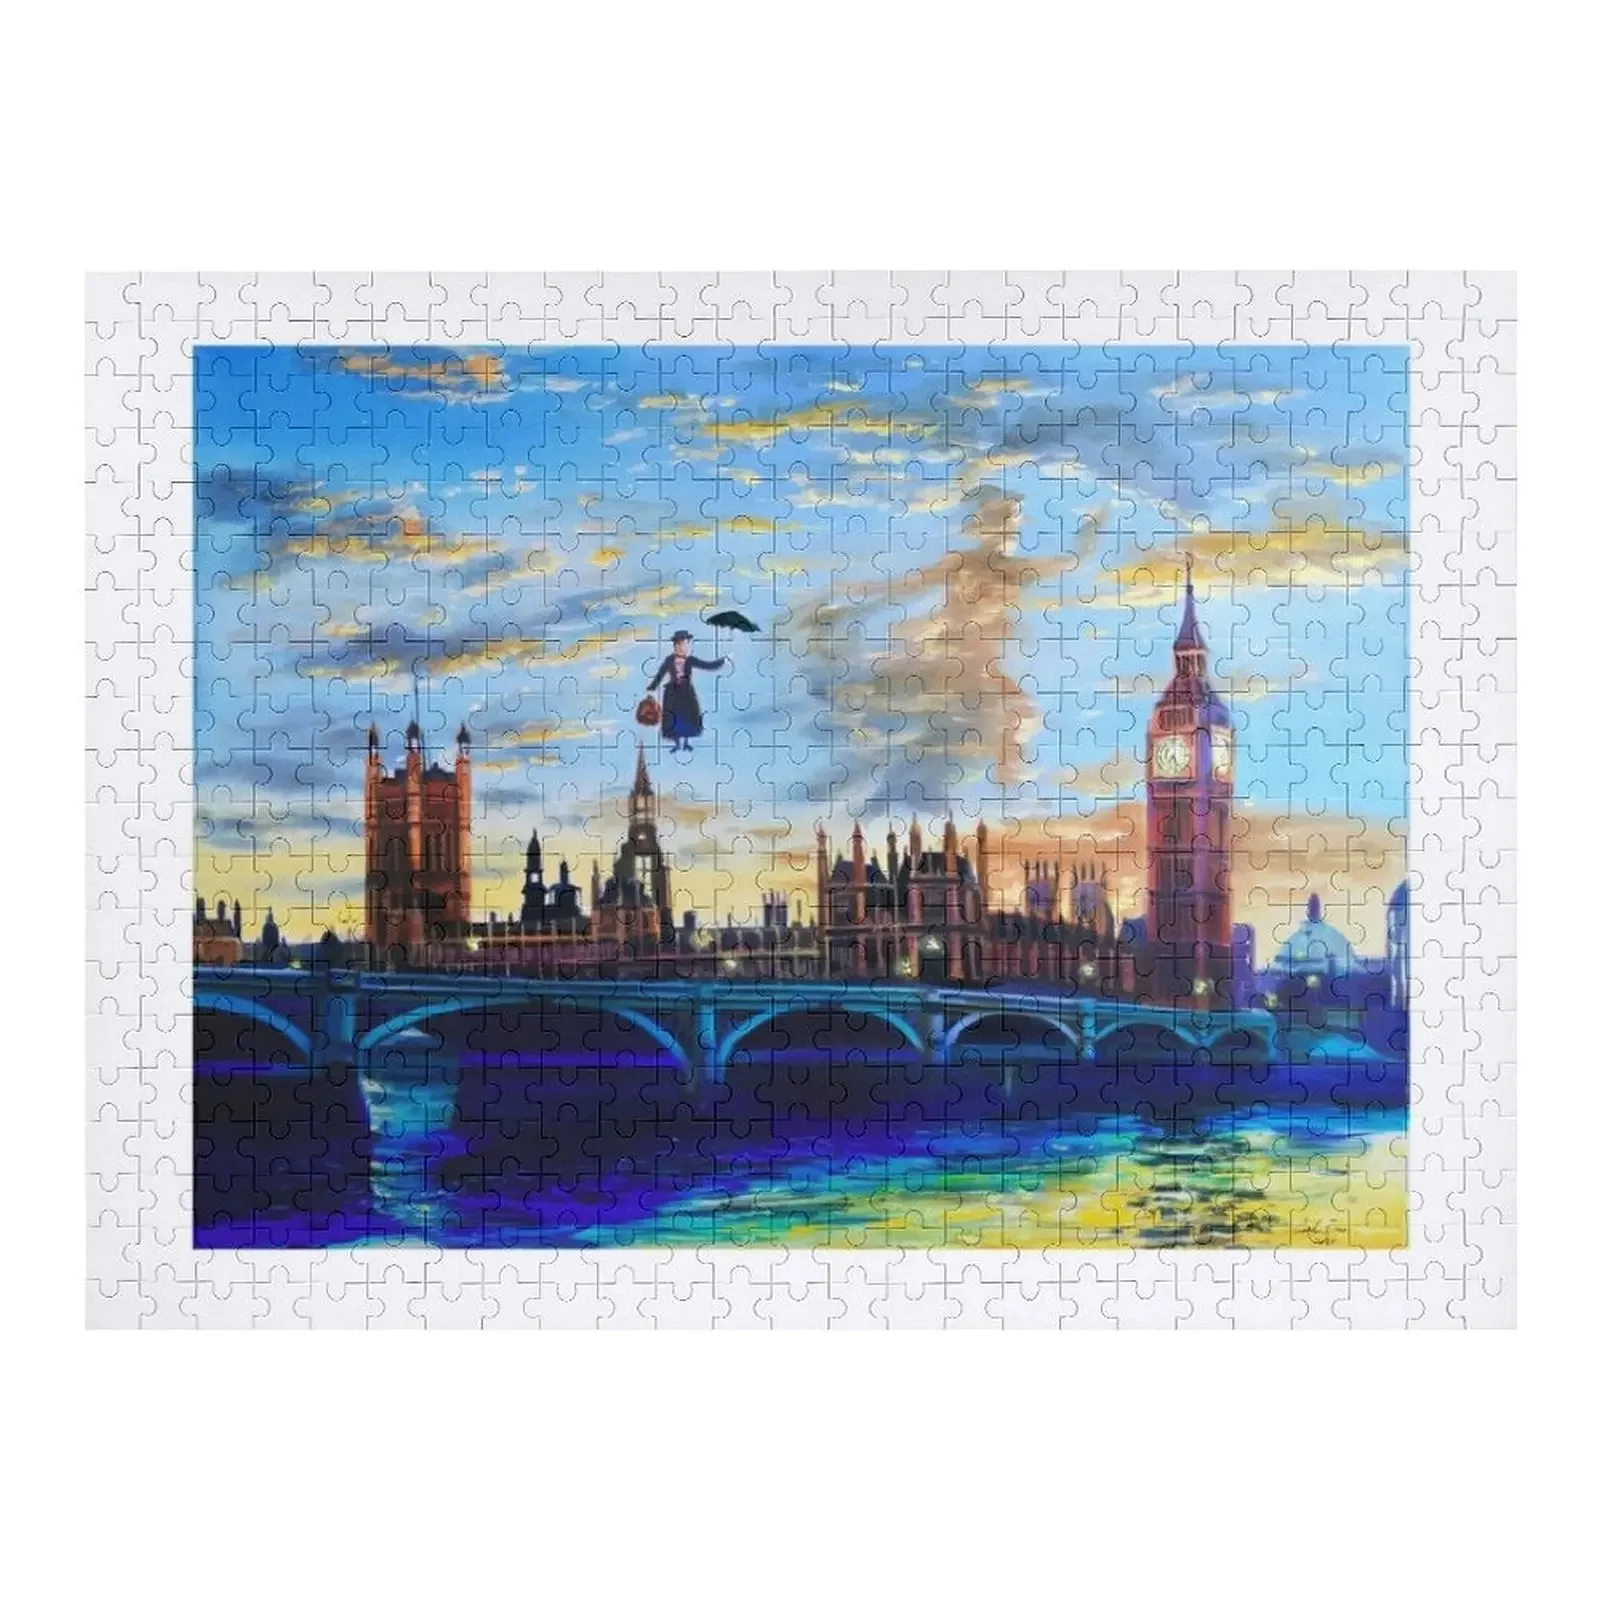 Mary Poppins returns to London Jigsaw Puzzle Diorama Accessories Toys For Children Personalized Gift Ideas Puzzle mary poppins the magical nanny jigsaw puzzle personalized kids gifts customized photo baby wooden puzzle